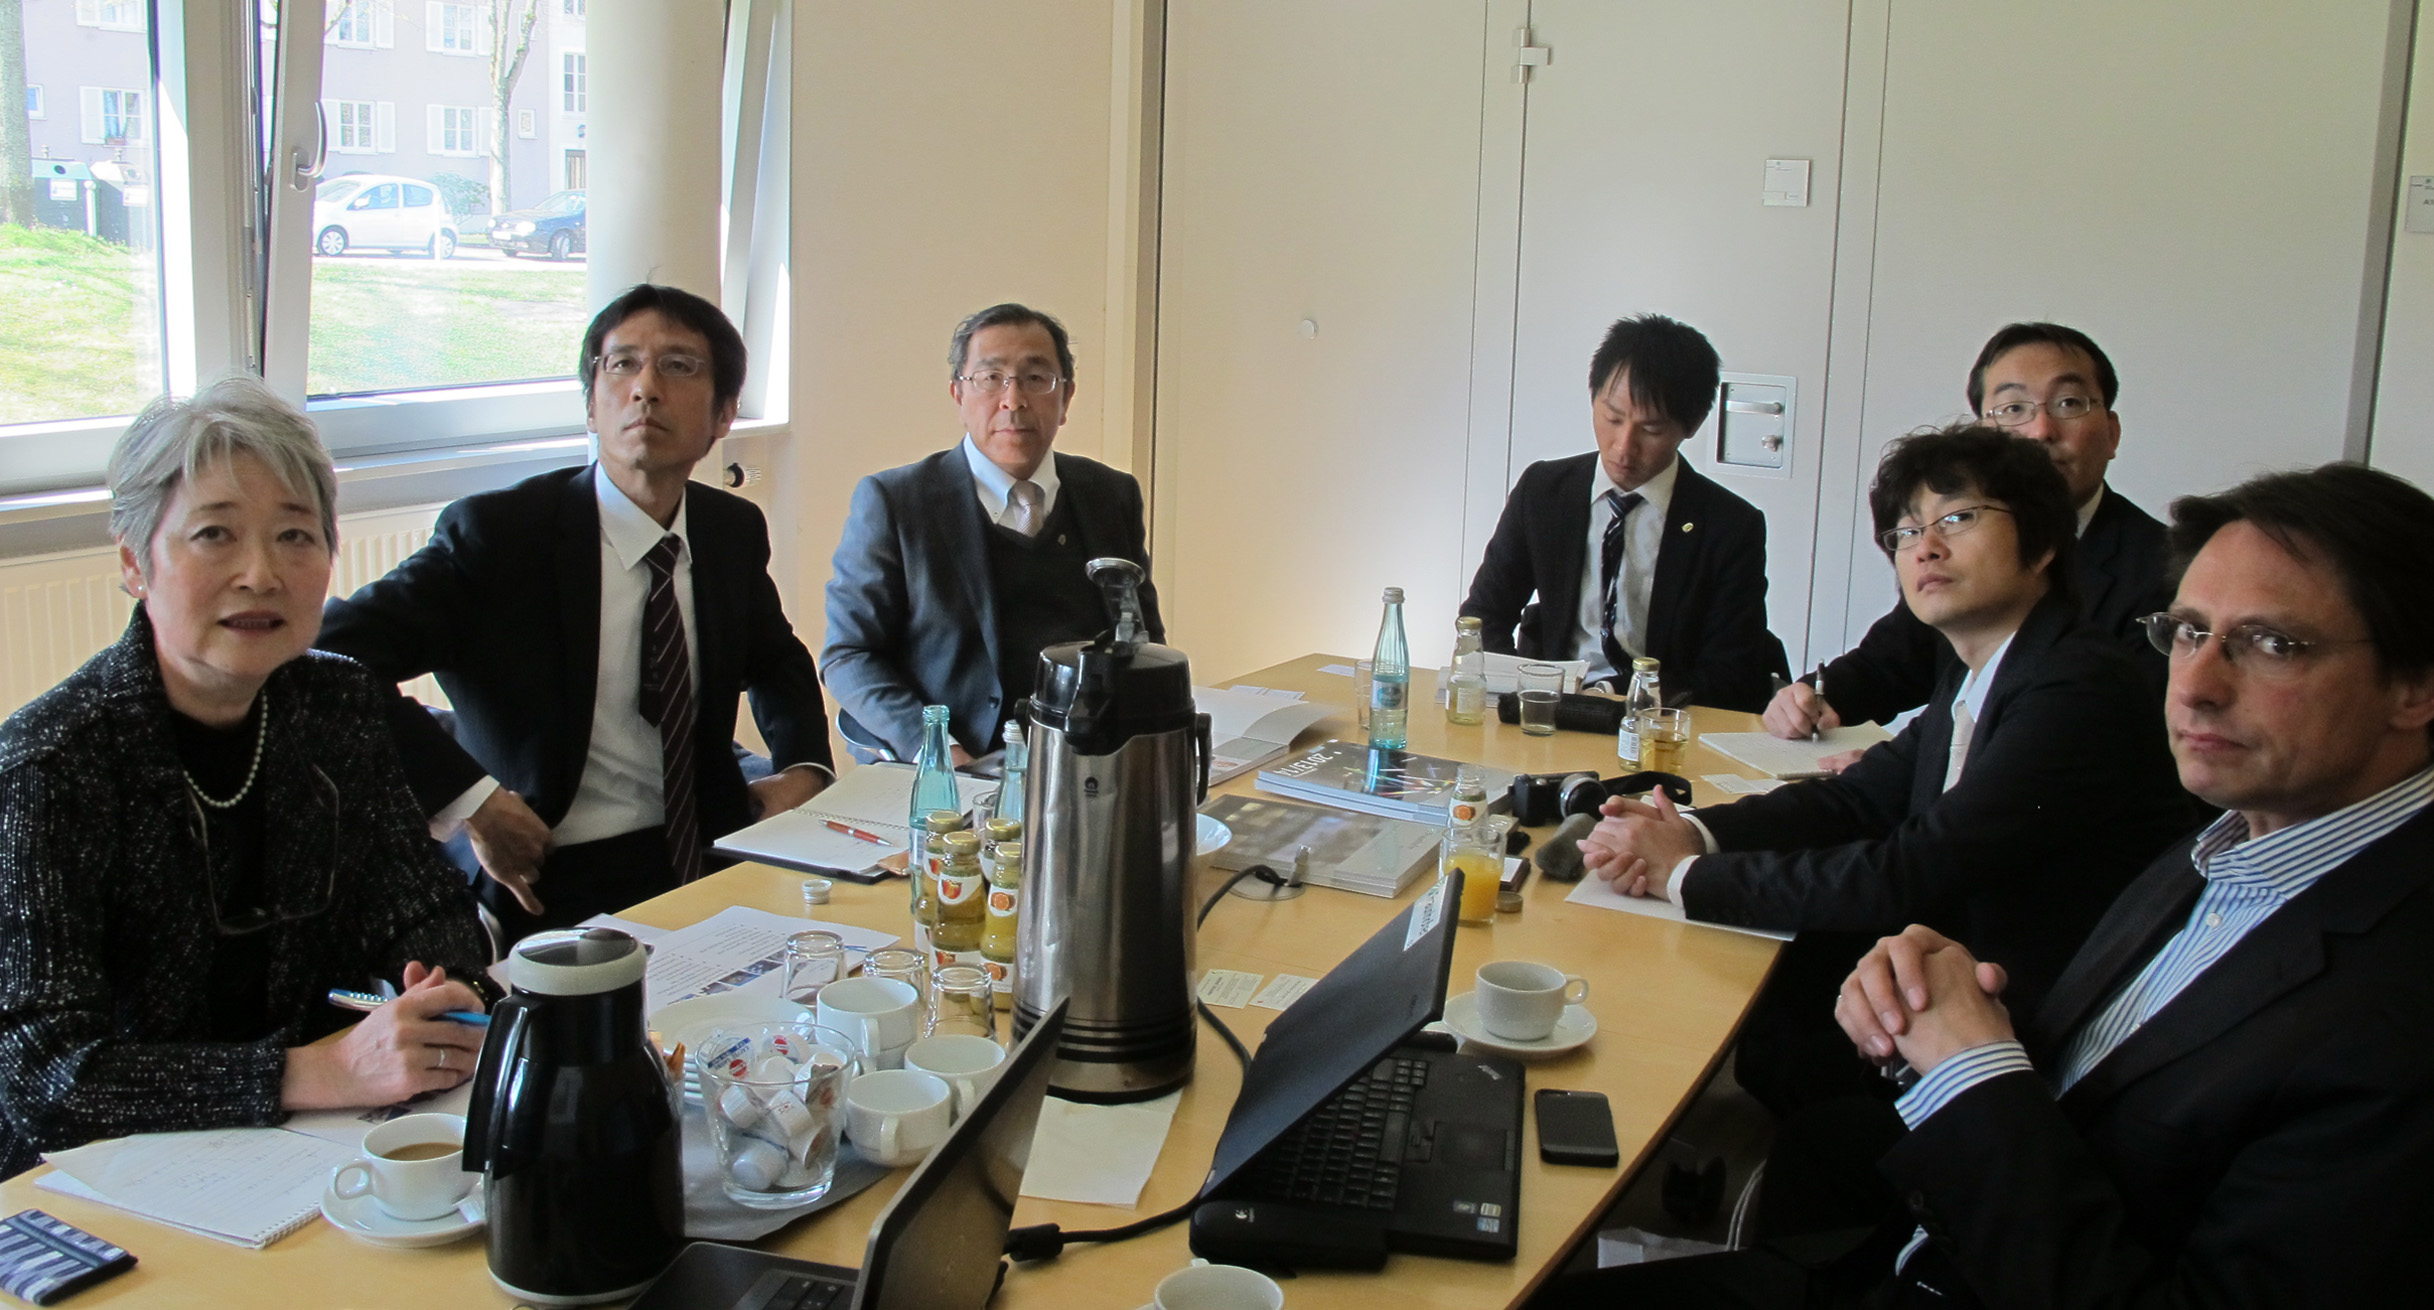 Dr. Christopher Hebling (right) receives the delegation at the Fraunhofer Institute for Solar Energy Systems.']